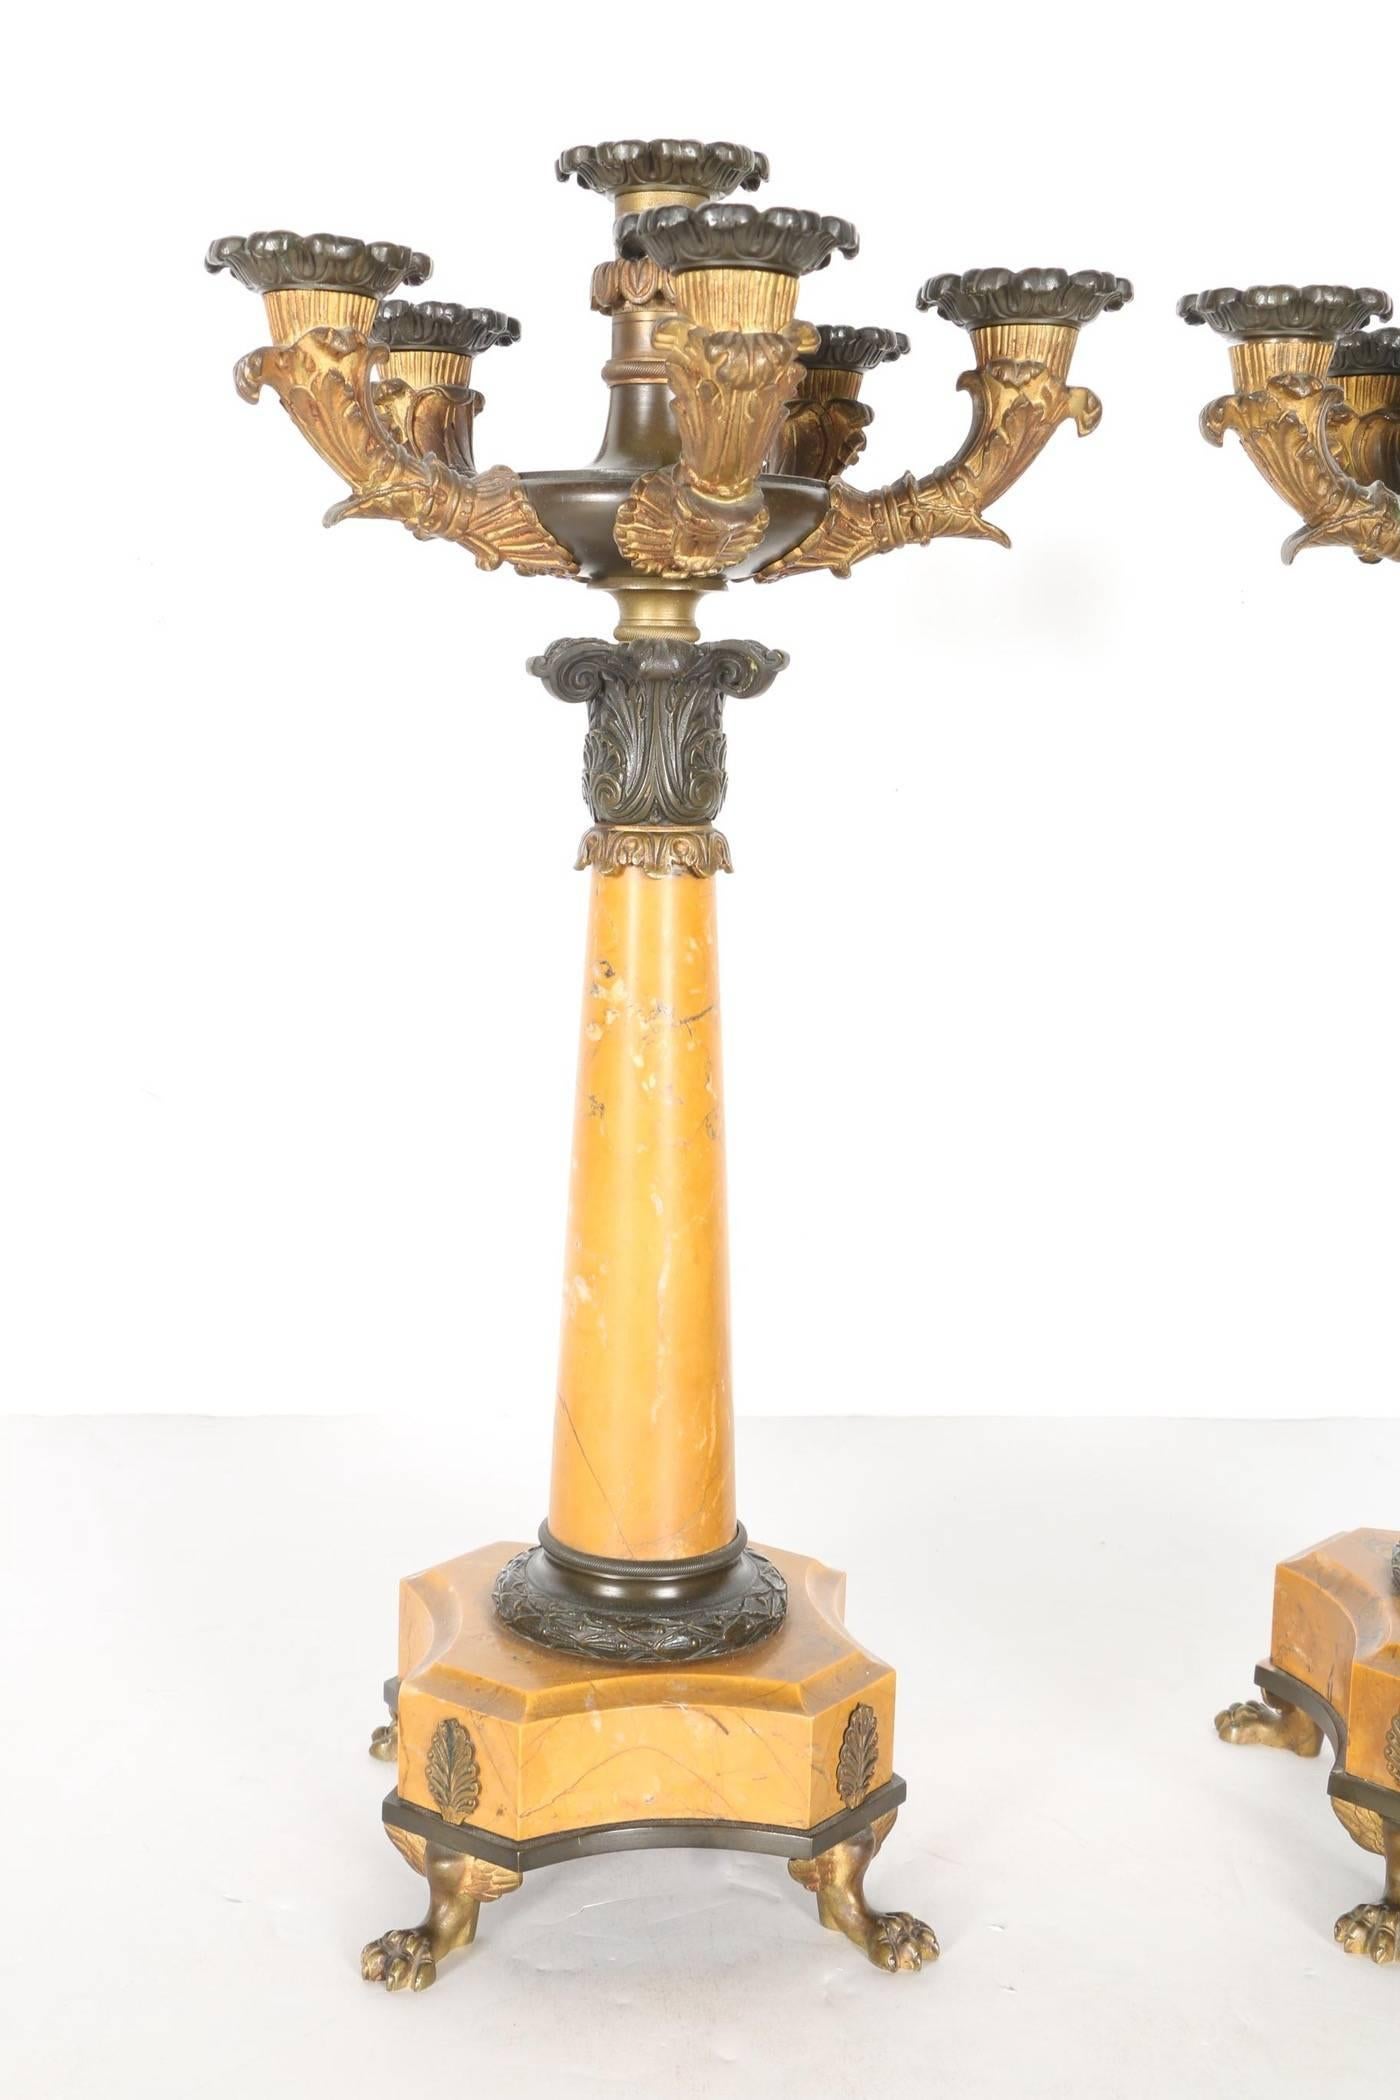 A pair of Charles X or Louis Philippe period patinated bronze and sienna marble featuring six candle holders, scalloped and floral accents, the columnar standards supported on gilt metal animal paw feet.
 